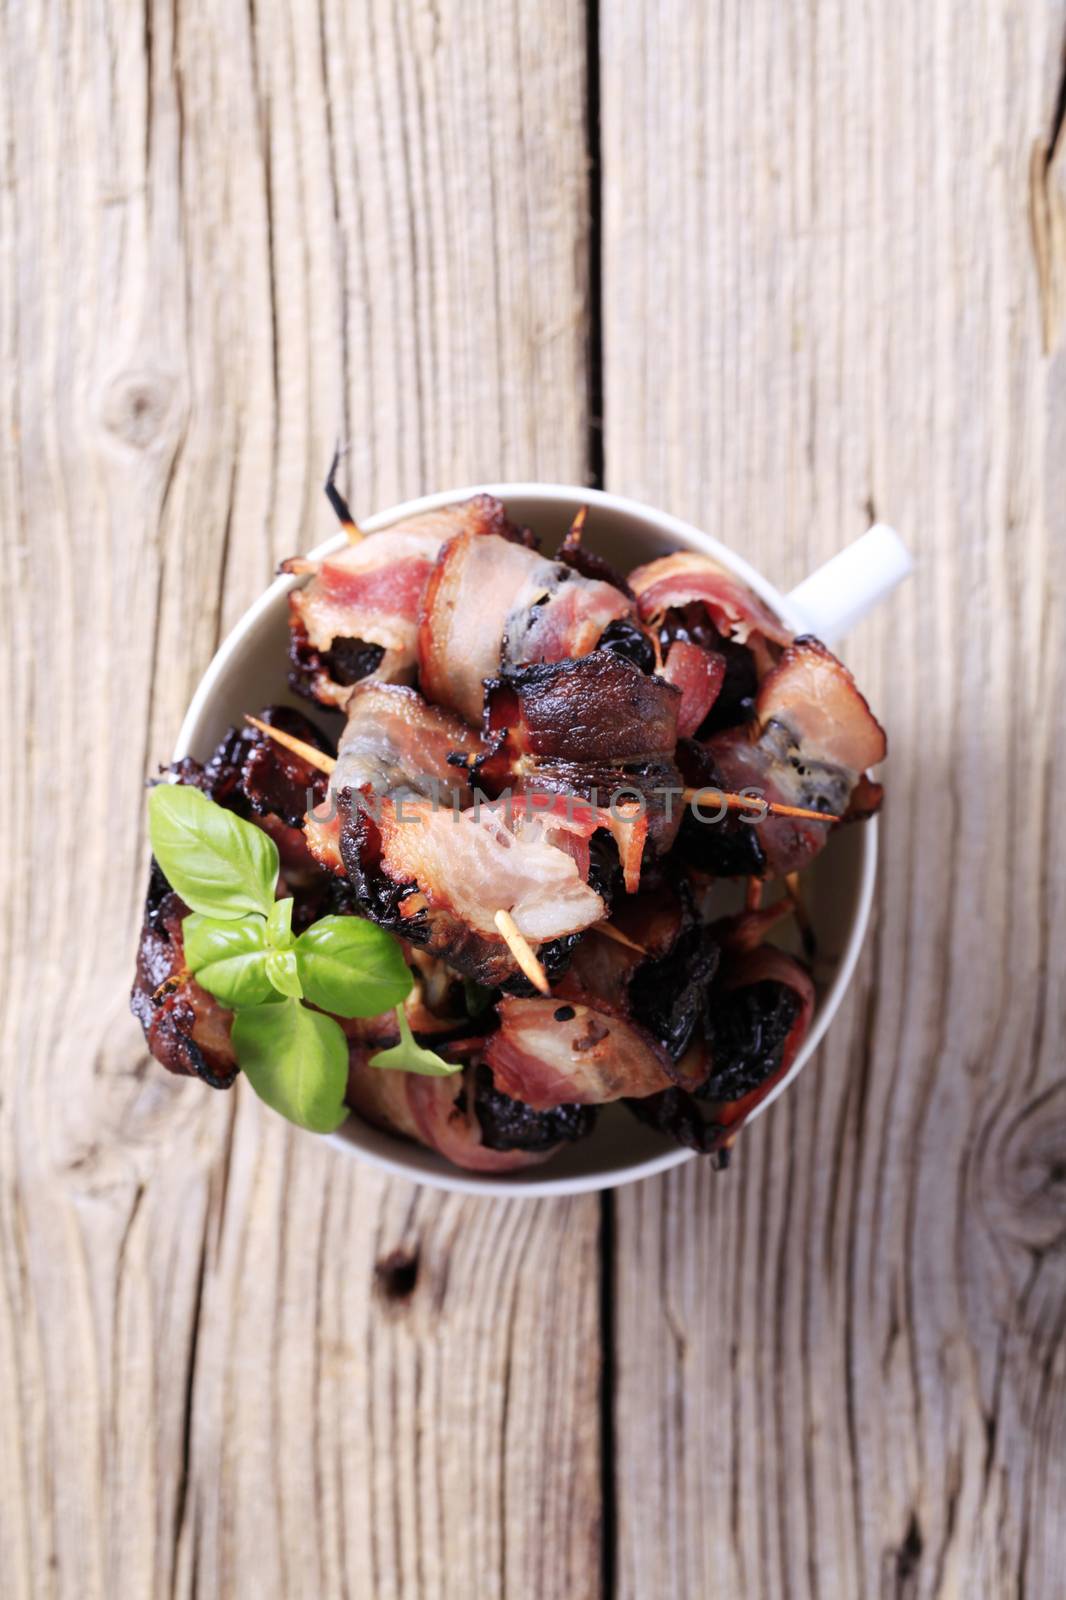 Bacon wrapped prunes by Digifoodstock